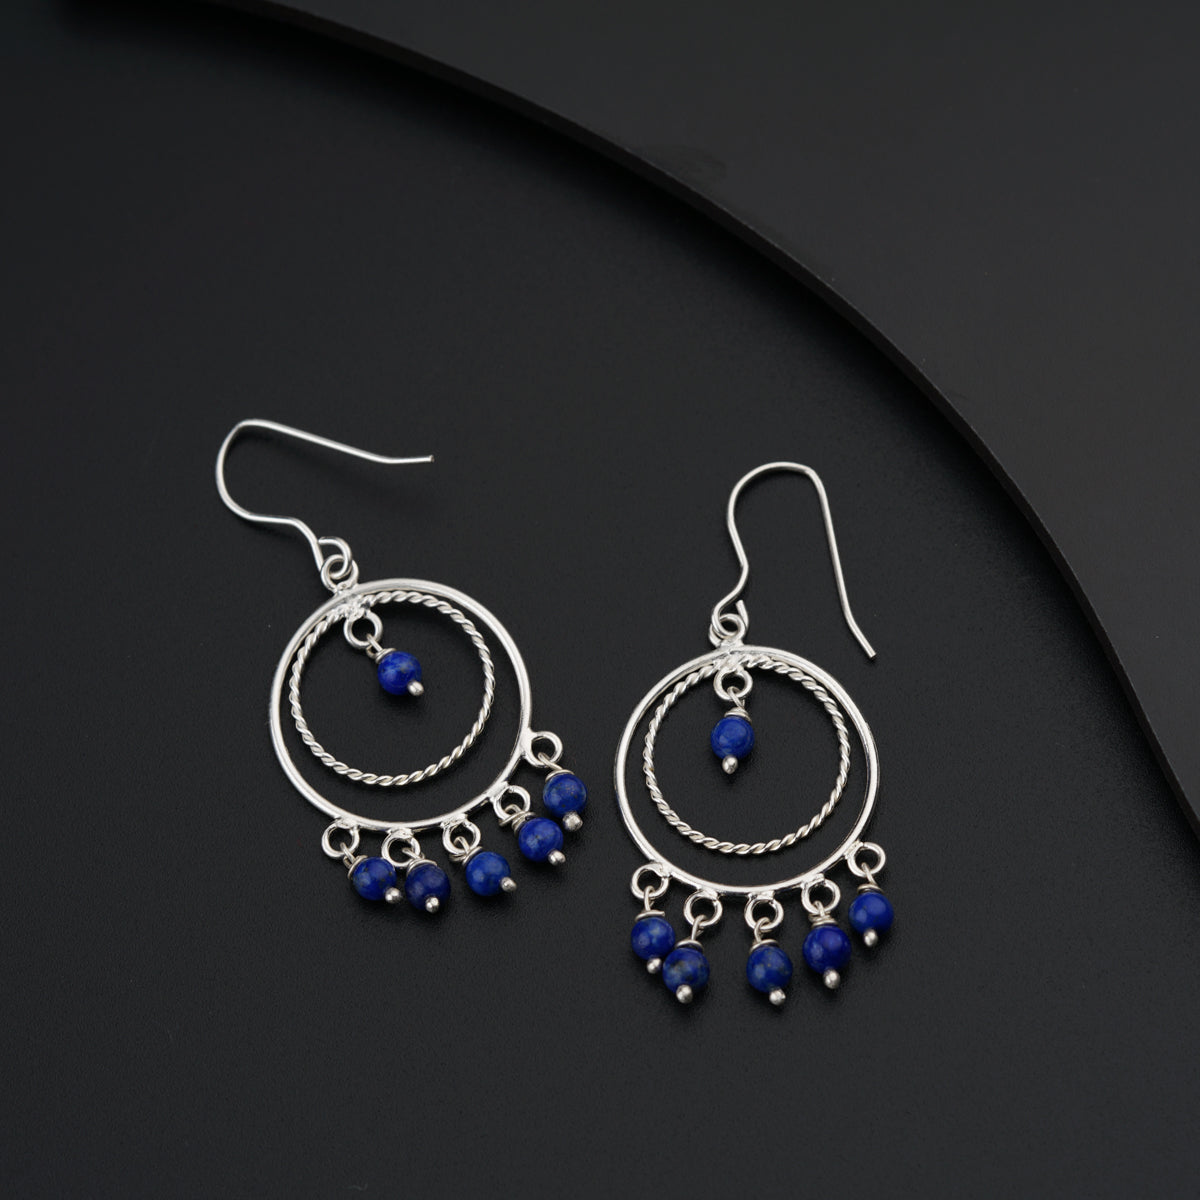 a pair of earrings with blue beads on a black surface